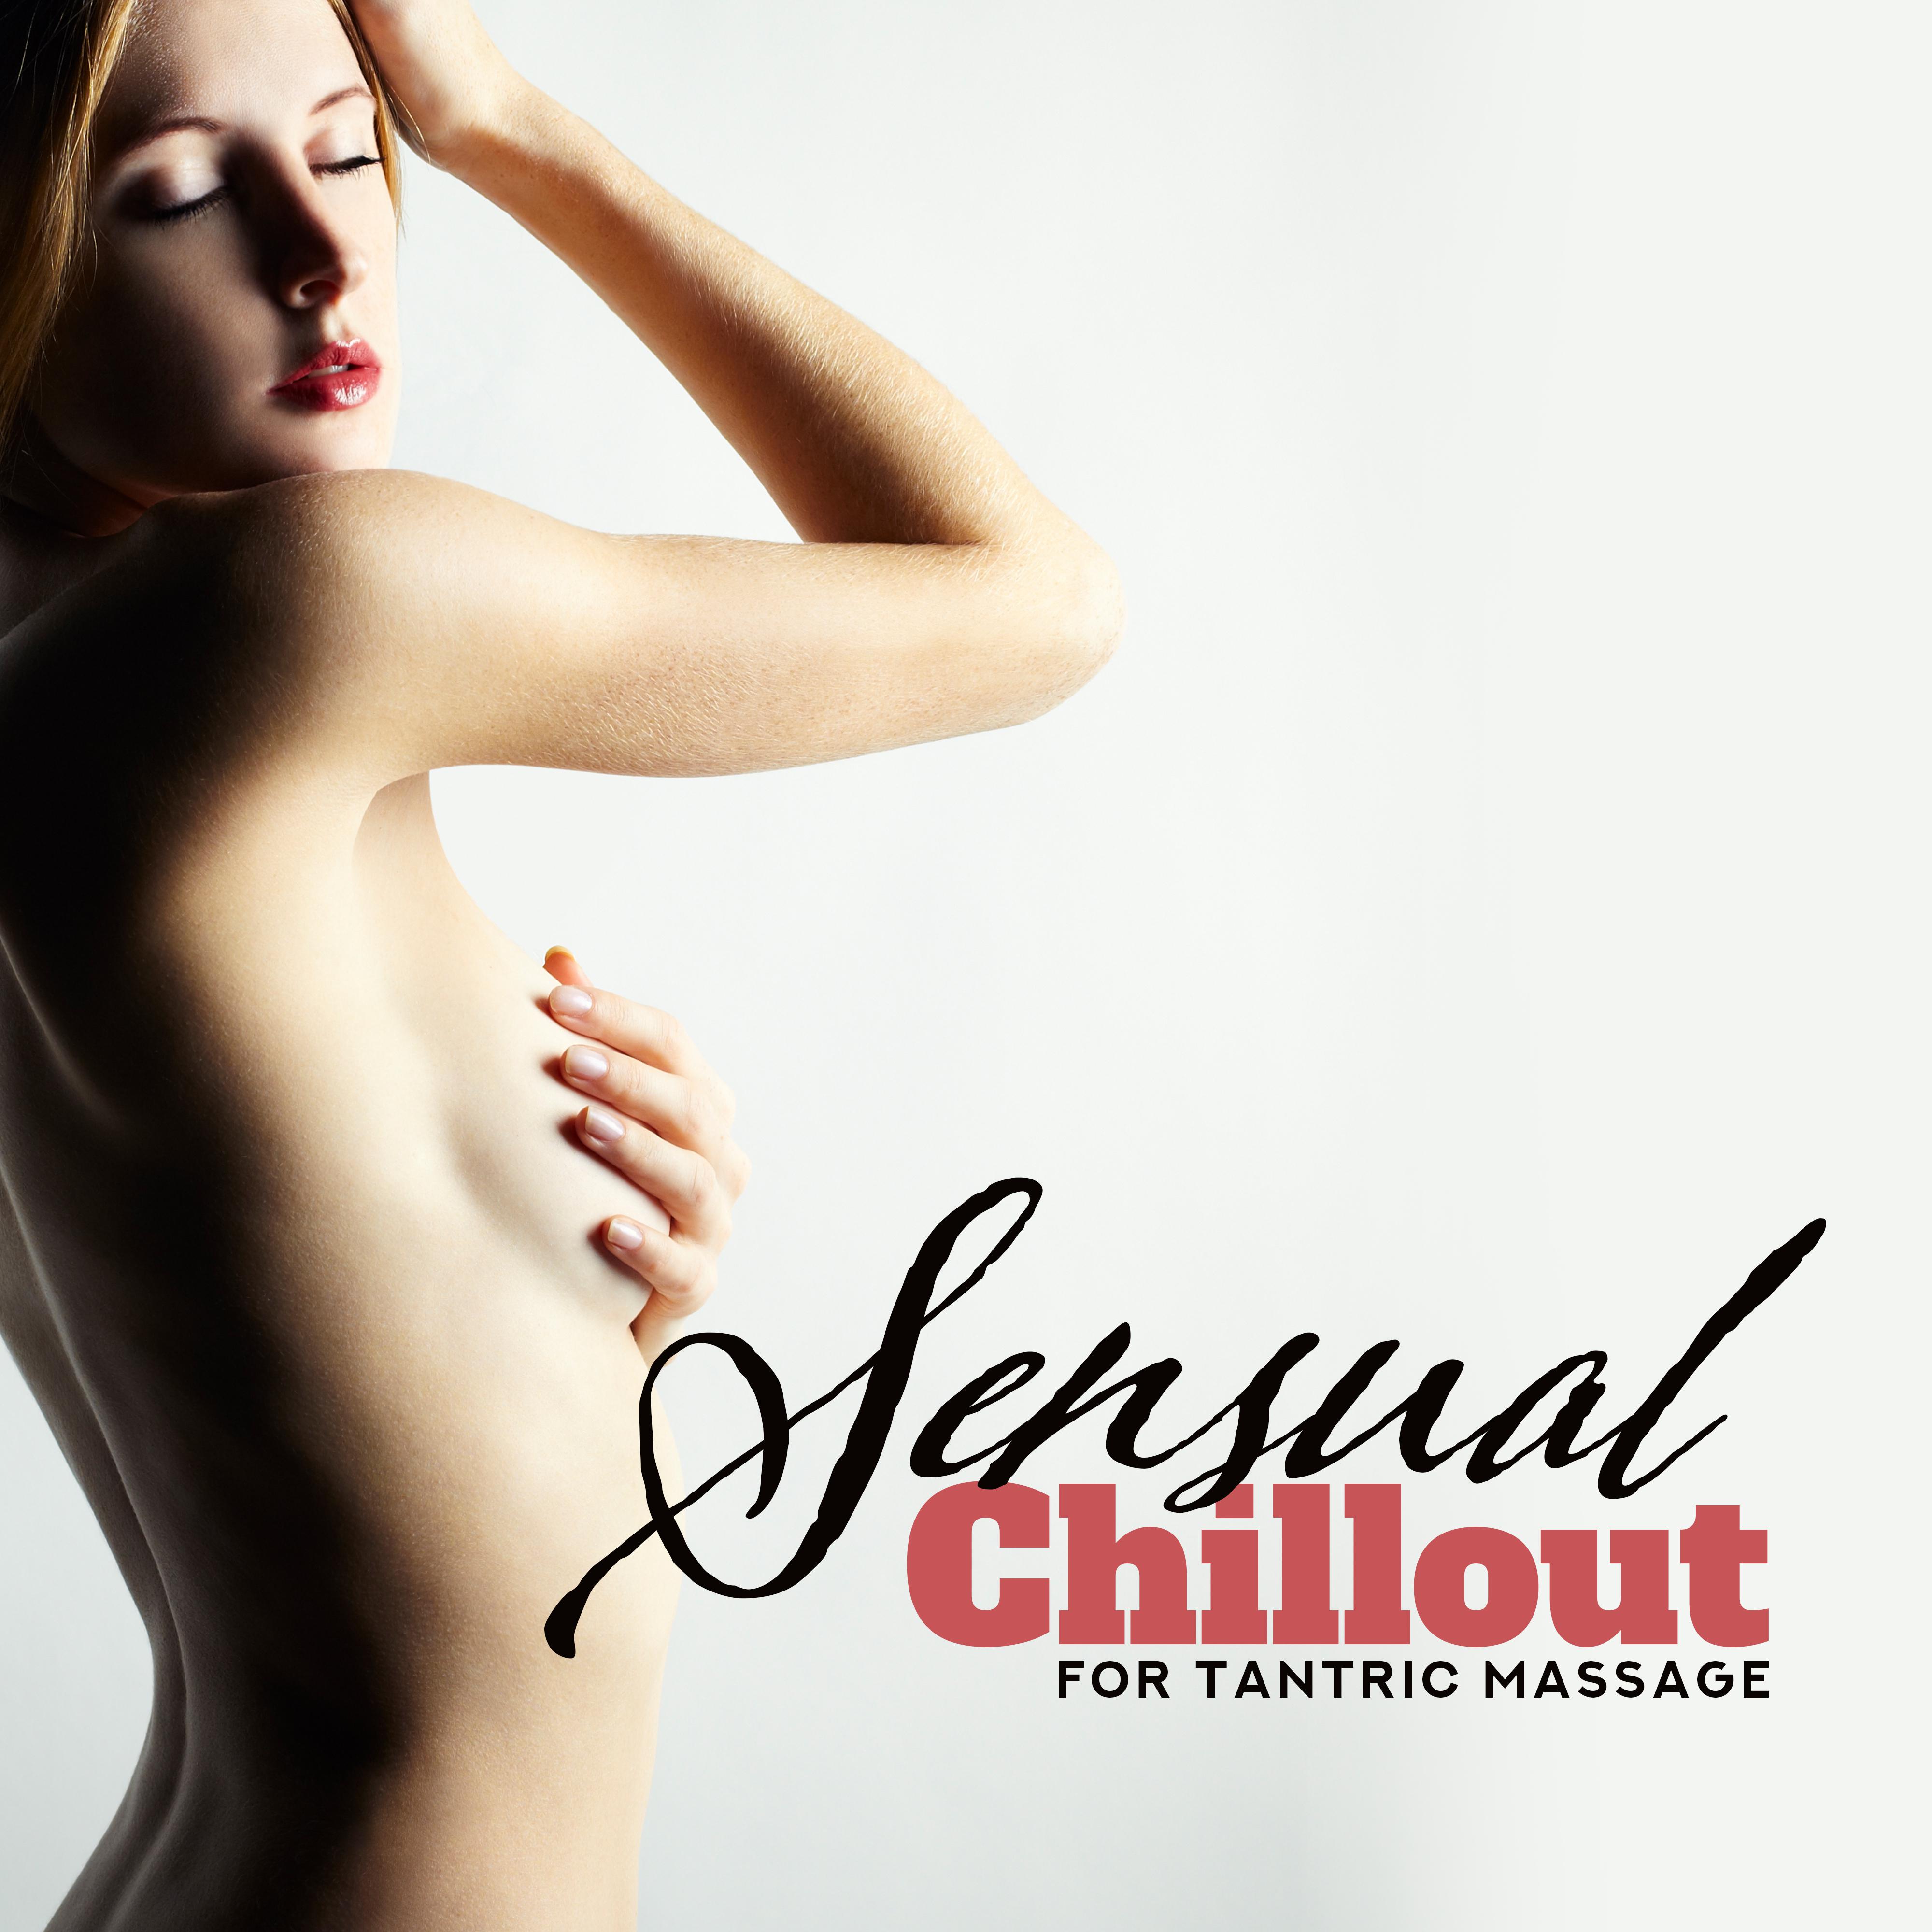 Sensual Chillout for Tantric Massage – Kamasutra Music, ****** Melodies for Making Love, Deep Relax, Erotic Music at Night, Sensual Massage